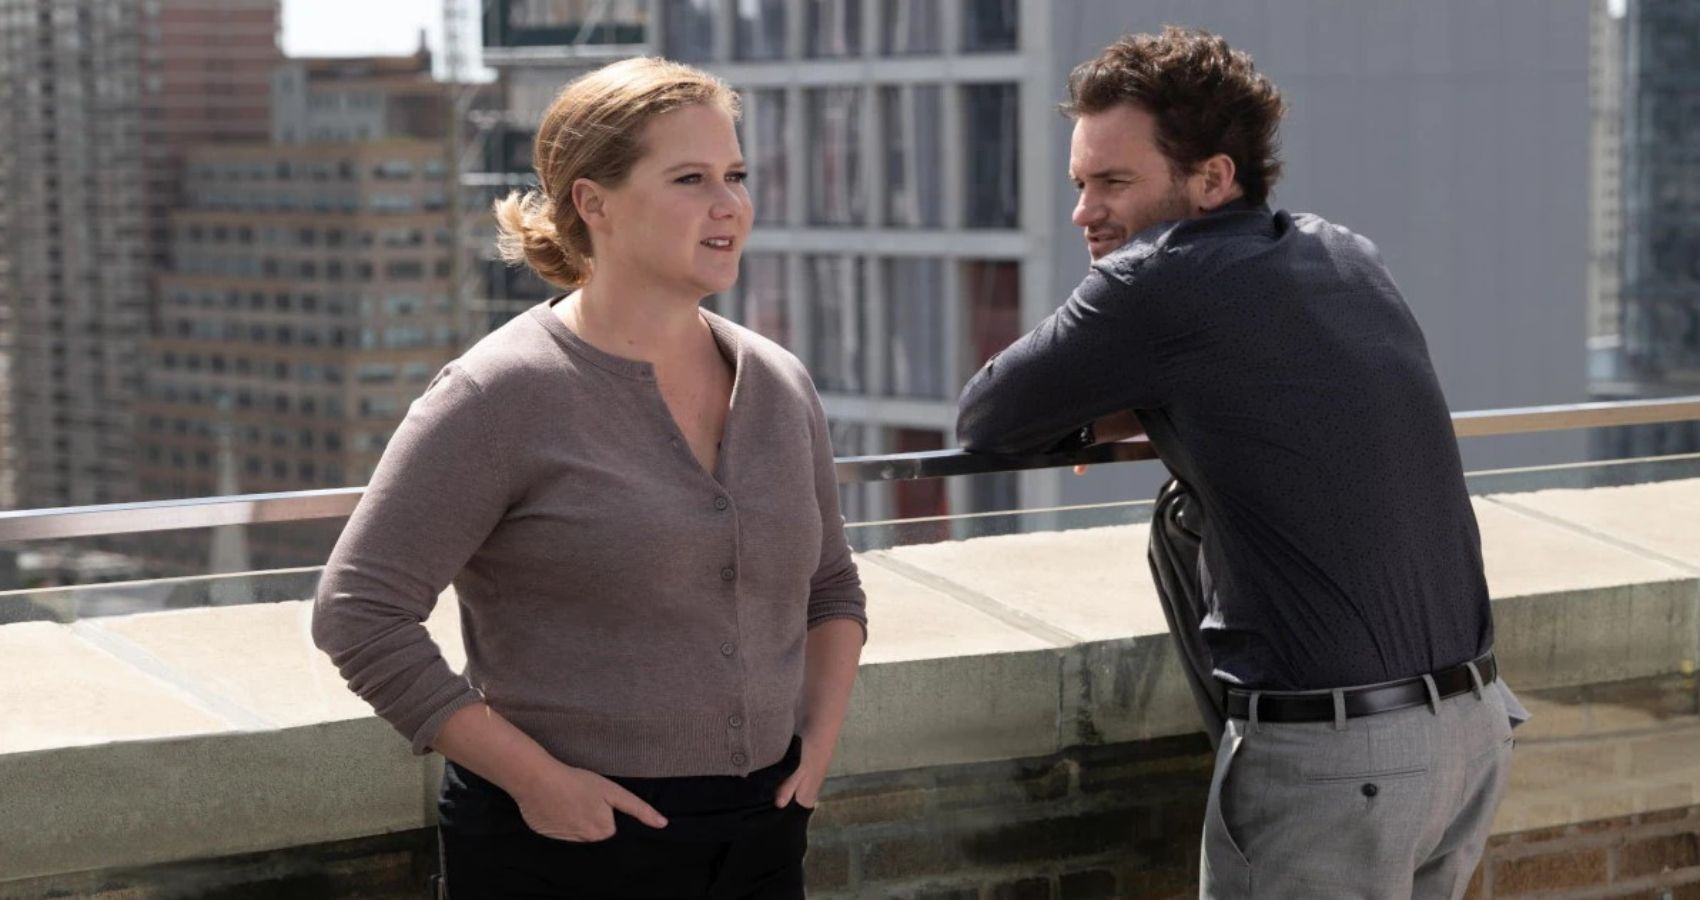 Amy Schumer in Life & Beth